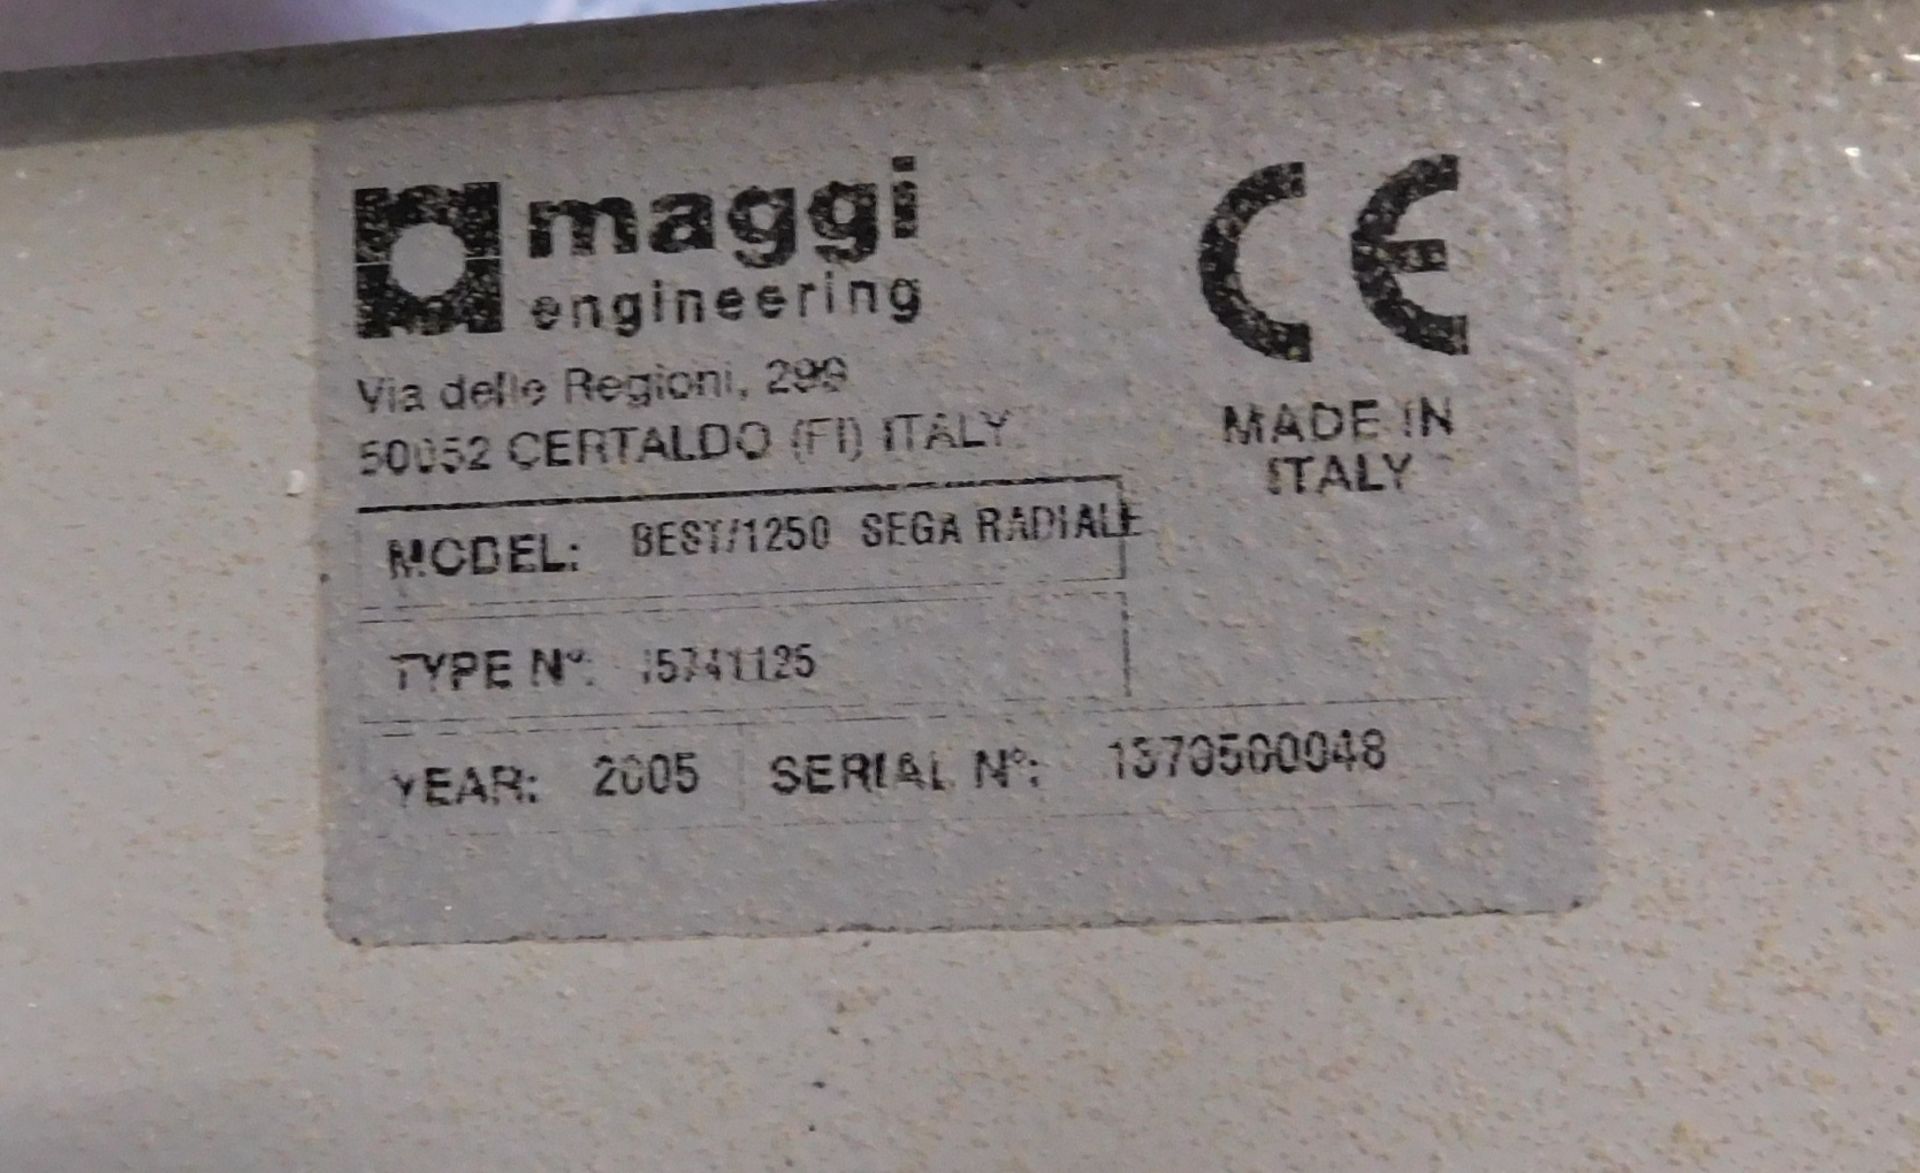 Maggi Best 1250 SEGA RADIALE Pull Out Cross Cut Saw, 2005, S/N 1570500048, 22in Blade - Image 4 of 7